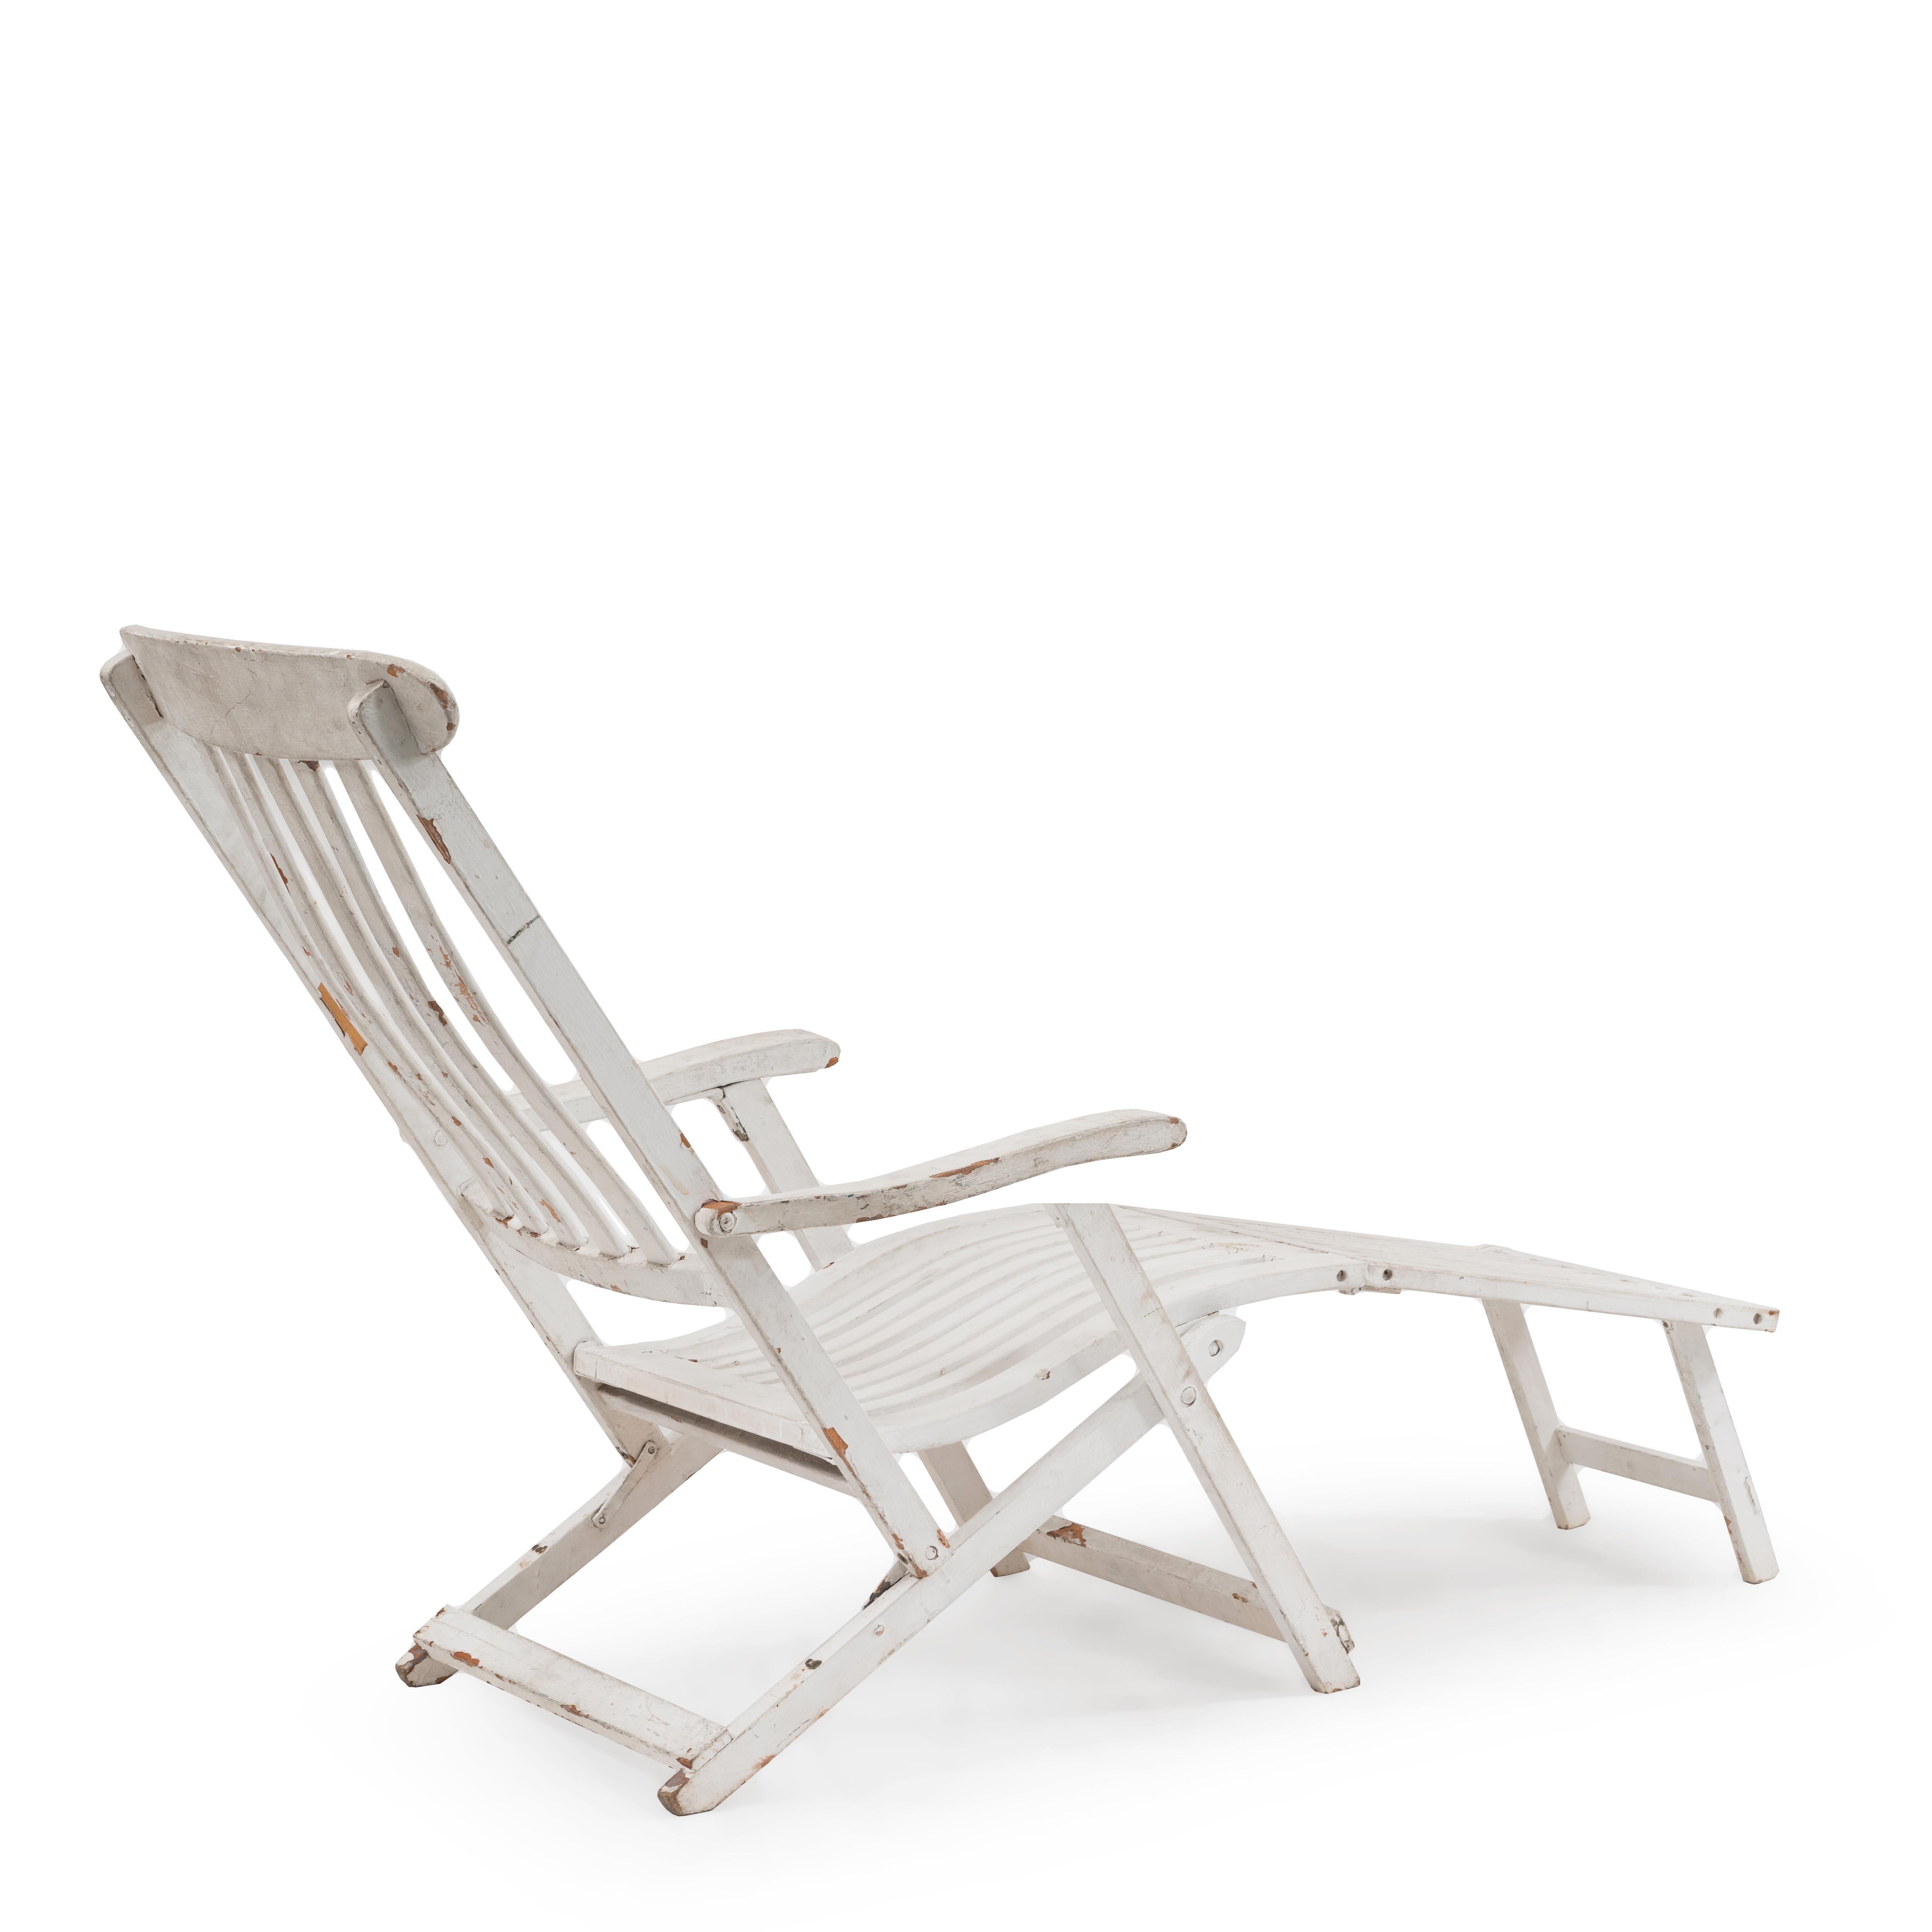 Painted Outdoor White Folding Deck Chairs For Sale